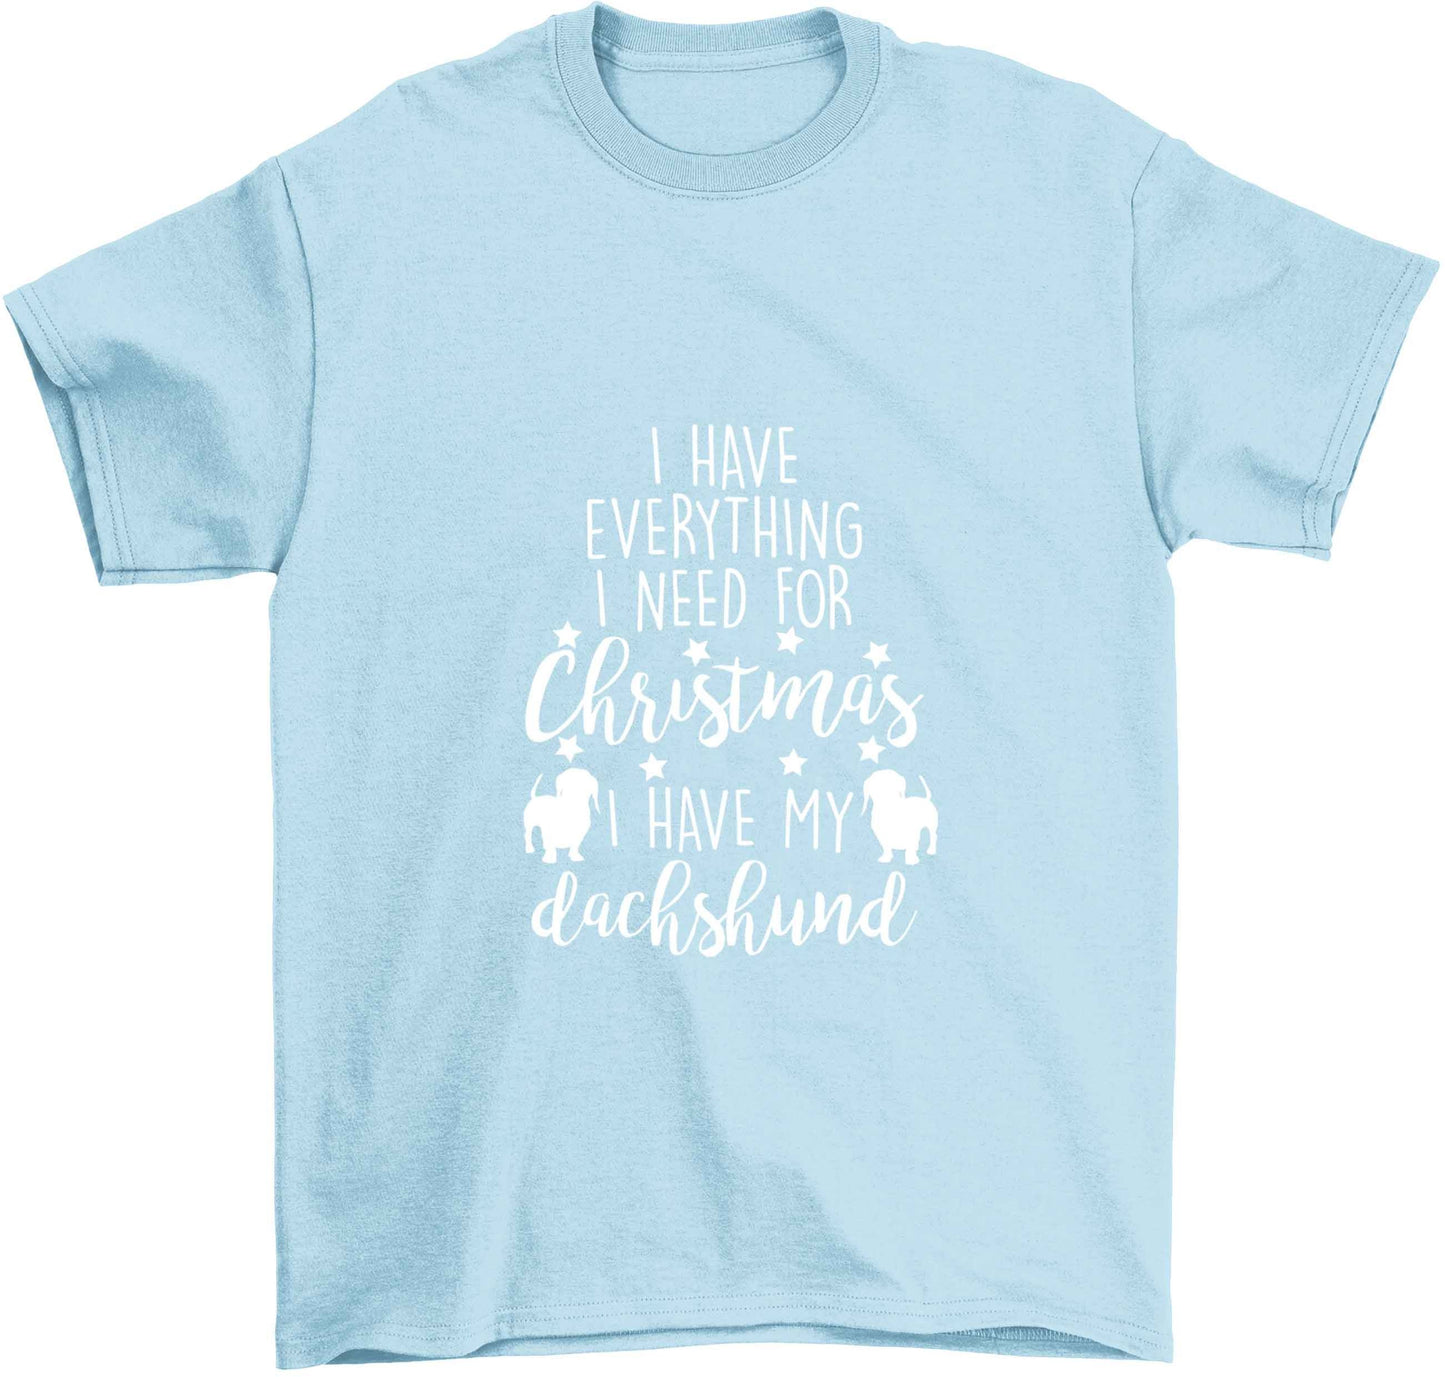 I have everything I need for Christmas I have my dachshund Children's light blue Tshirt 12-13 Years